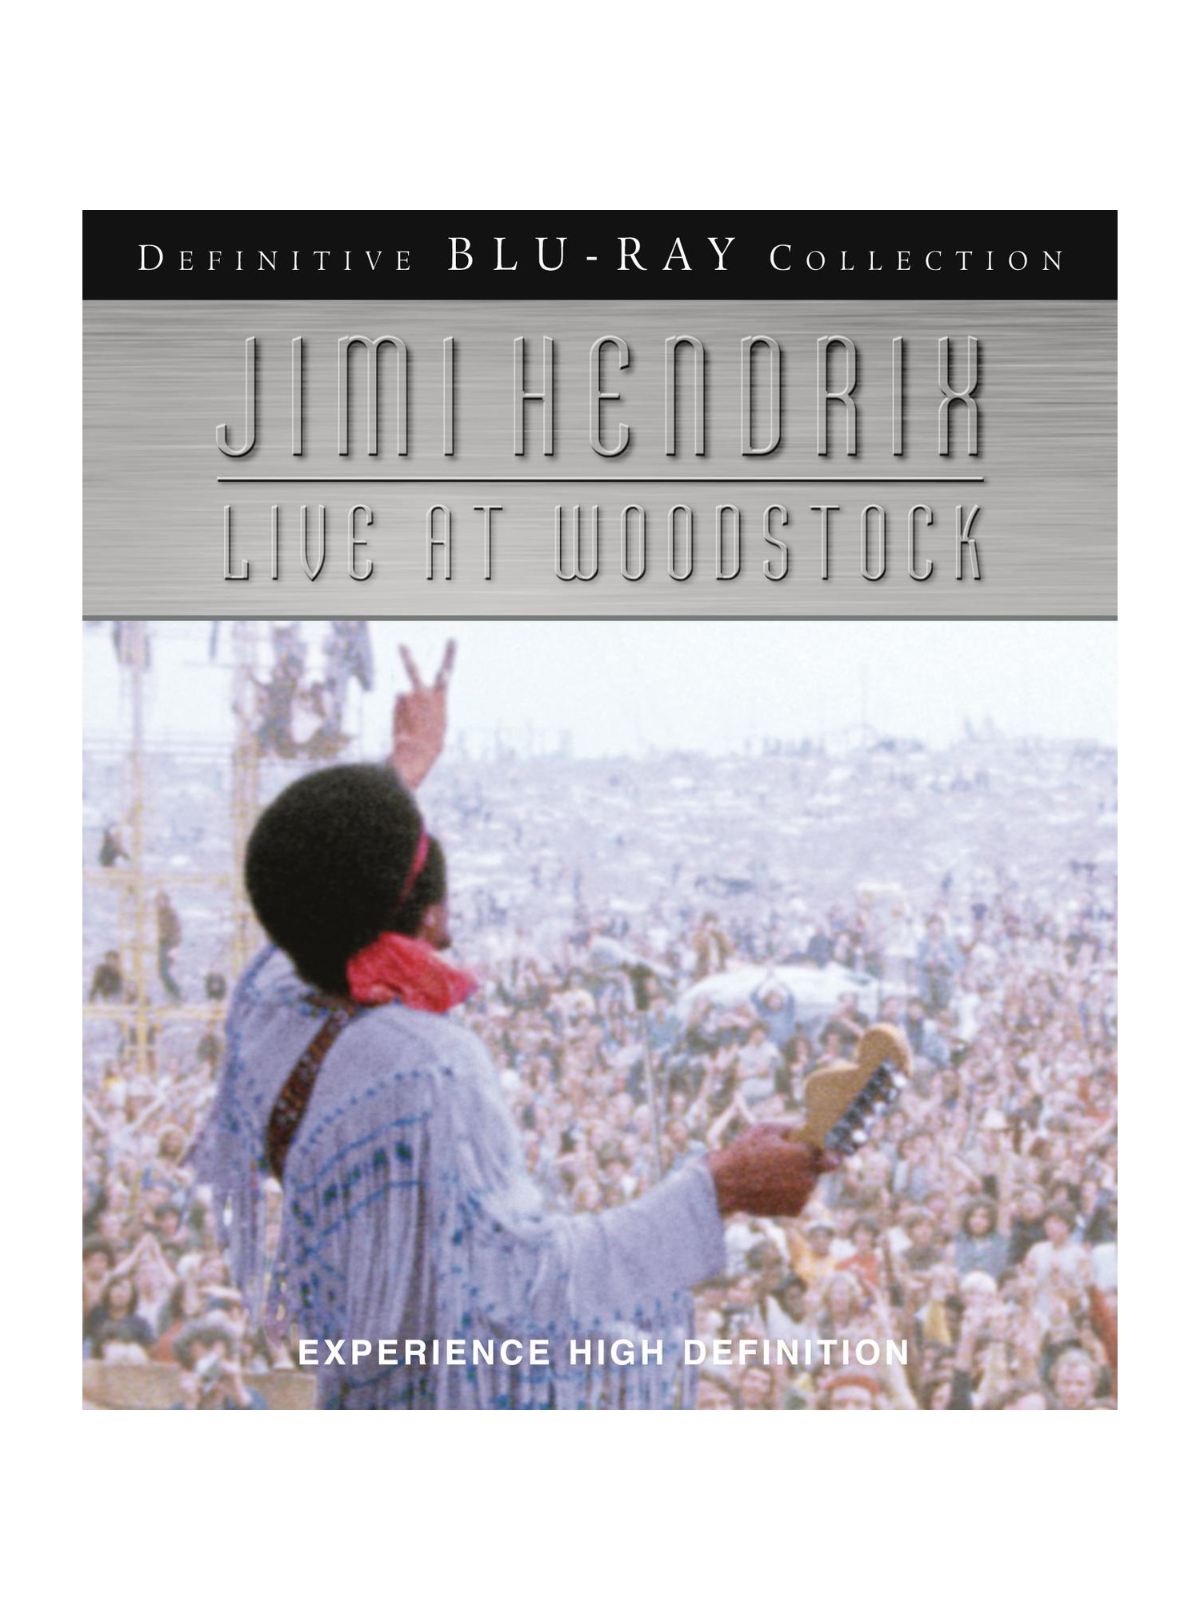 Live At Woodstock Blu-Ray DVD